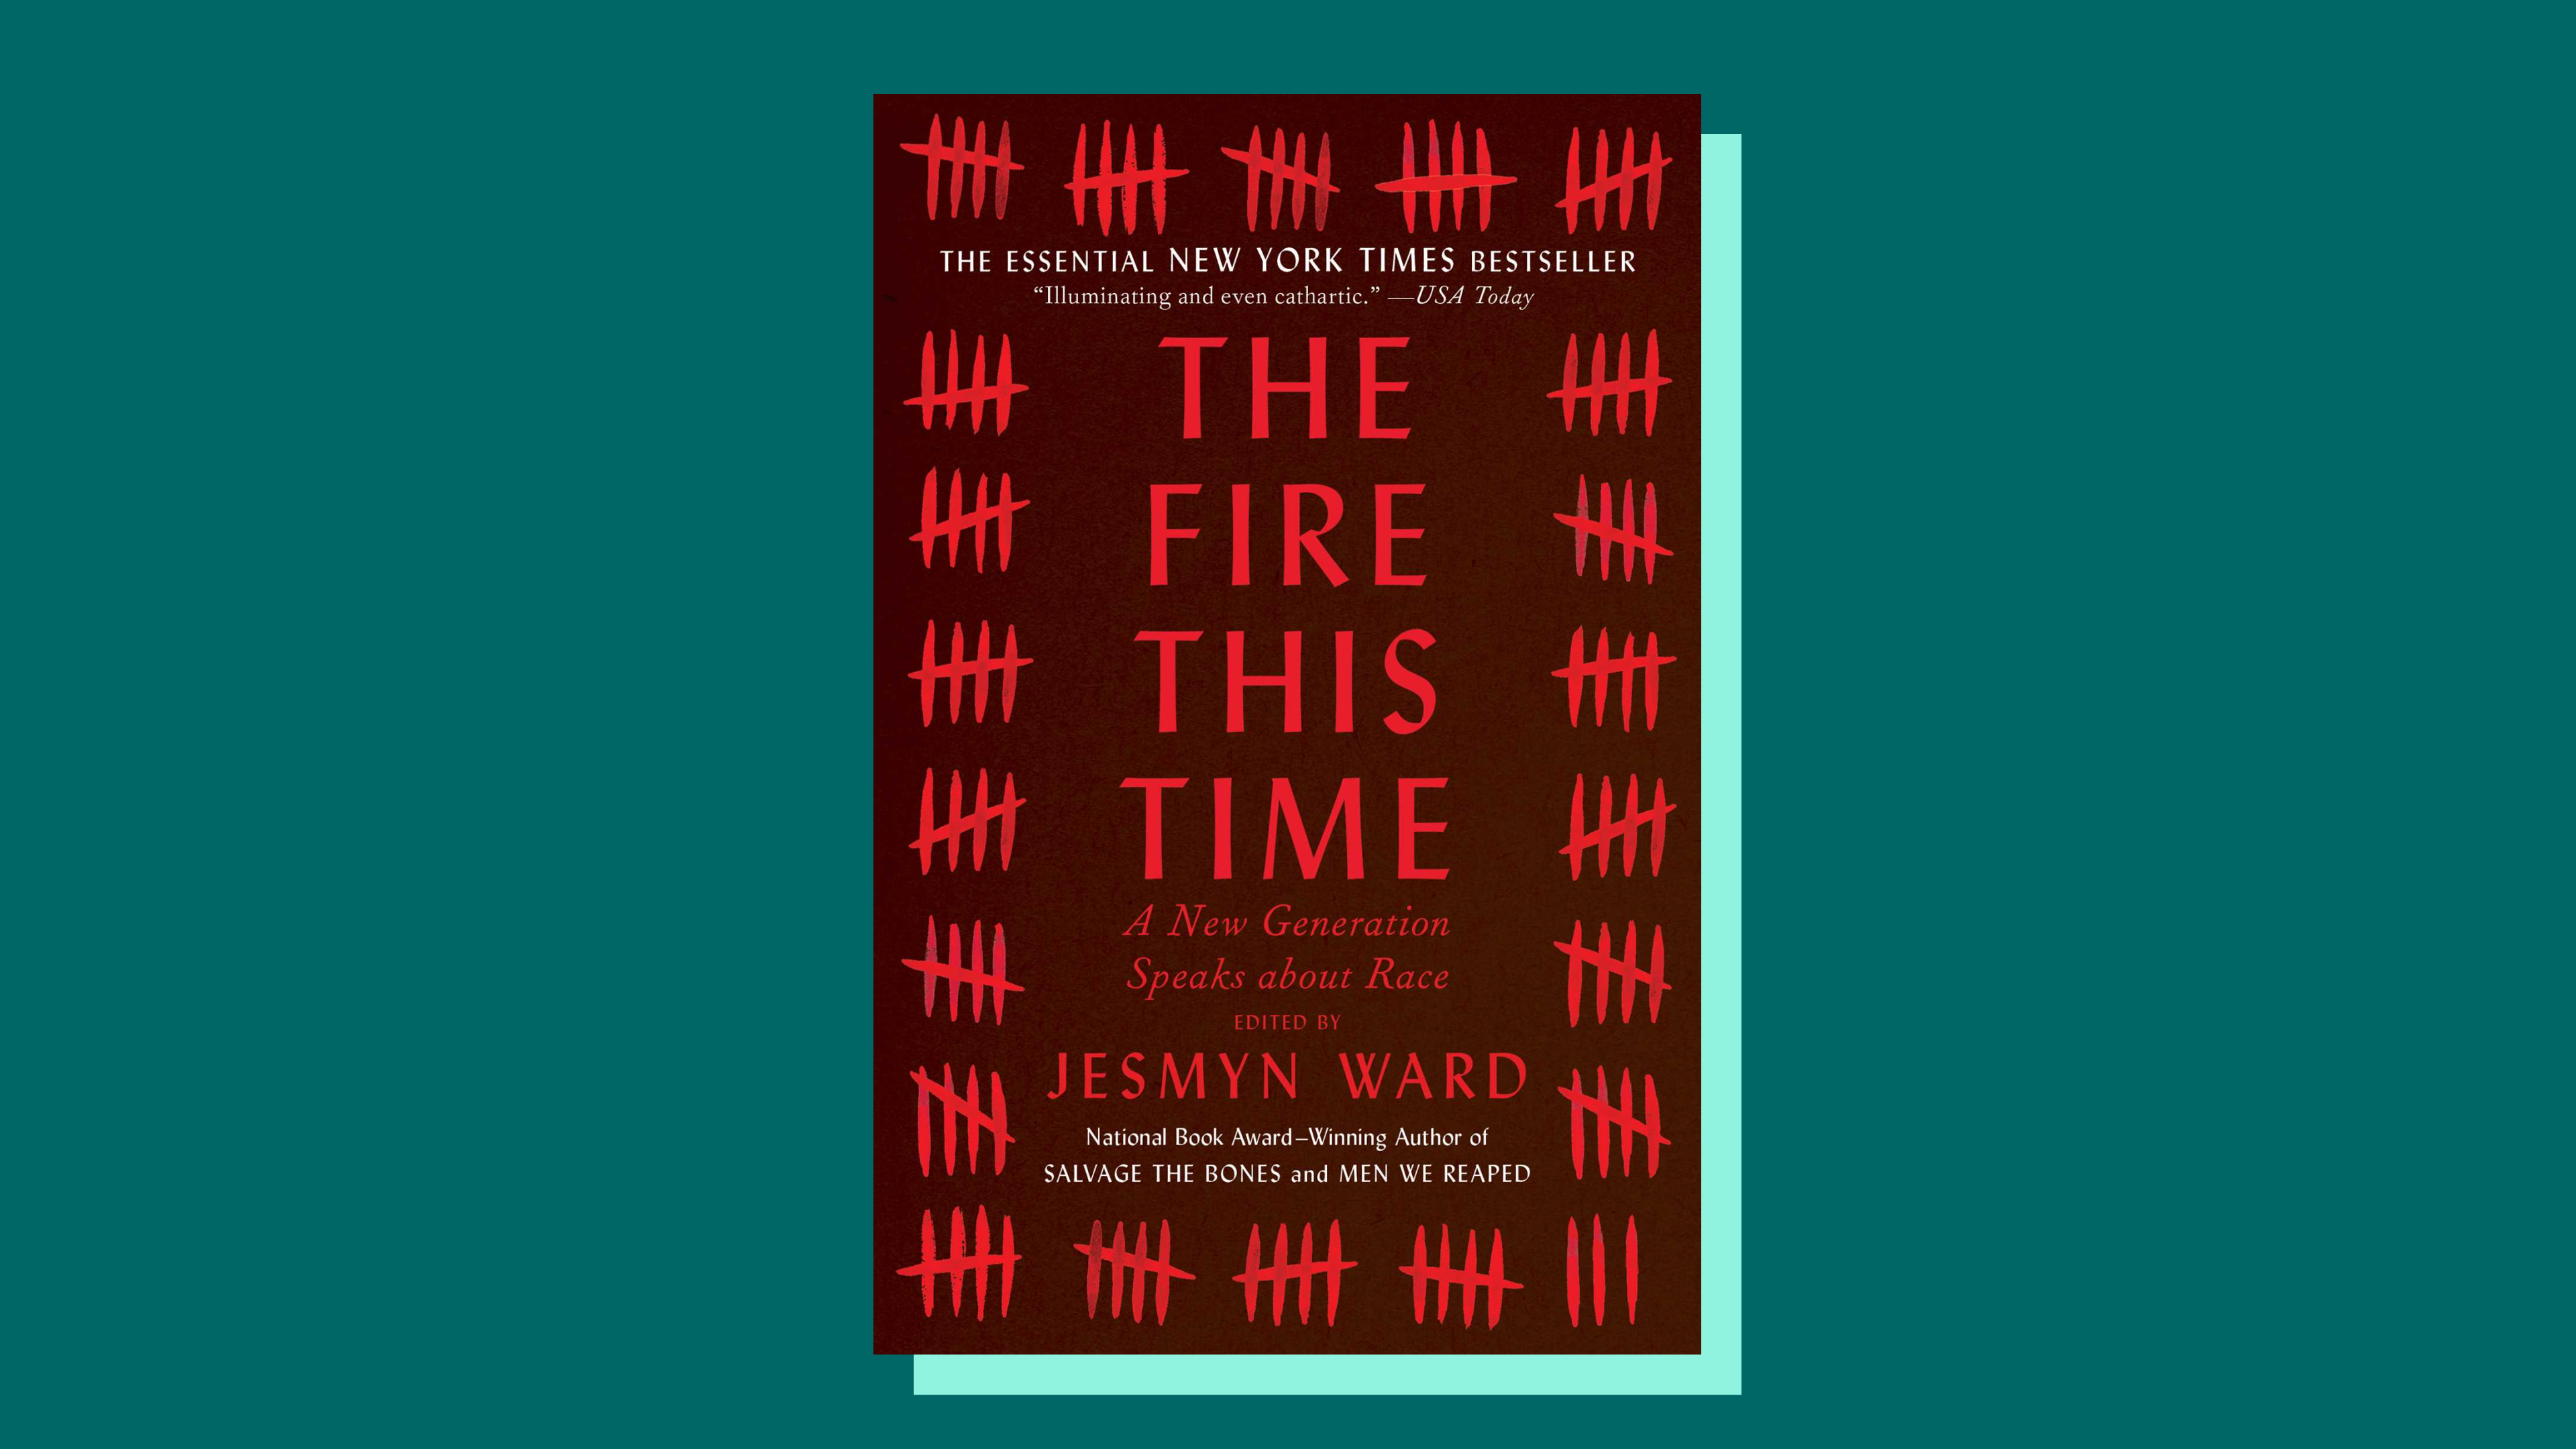 “The Fire This Time: A New Generation Speaks About Race” edited by Jesmyn Ward 